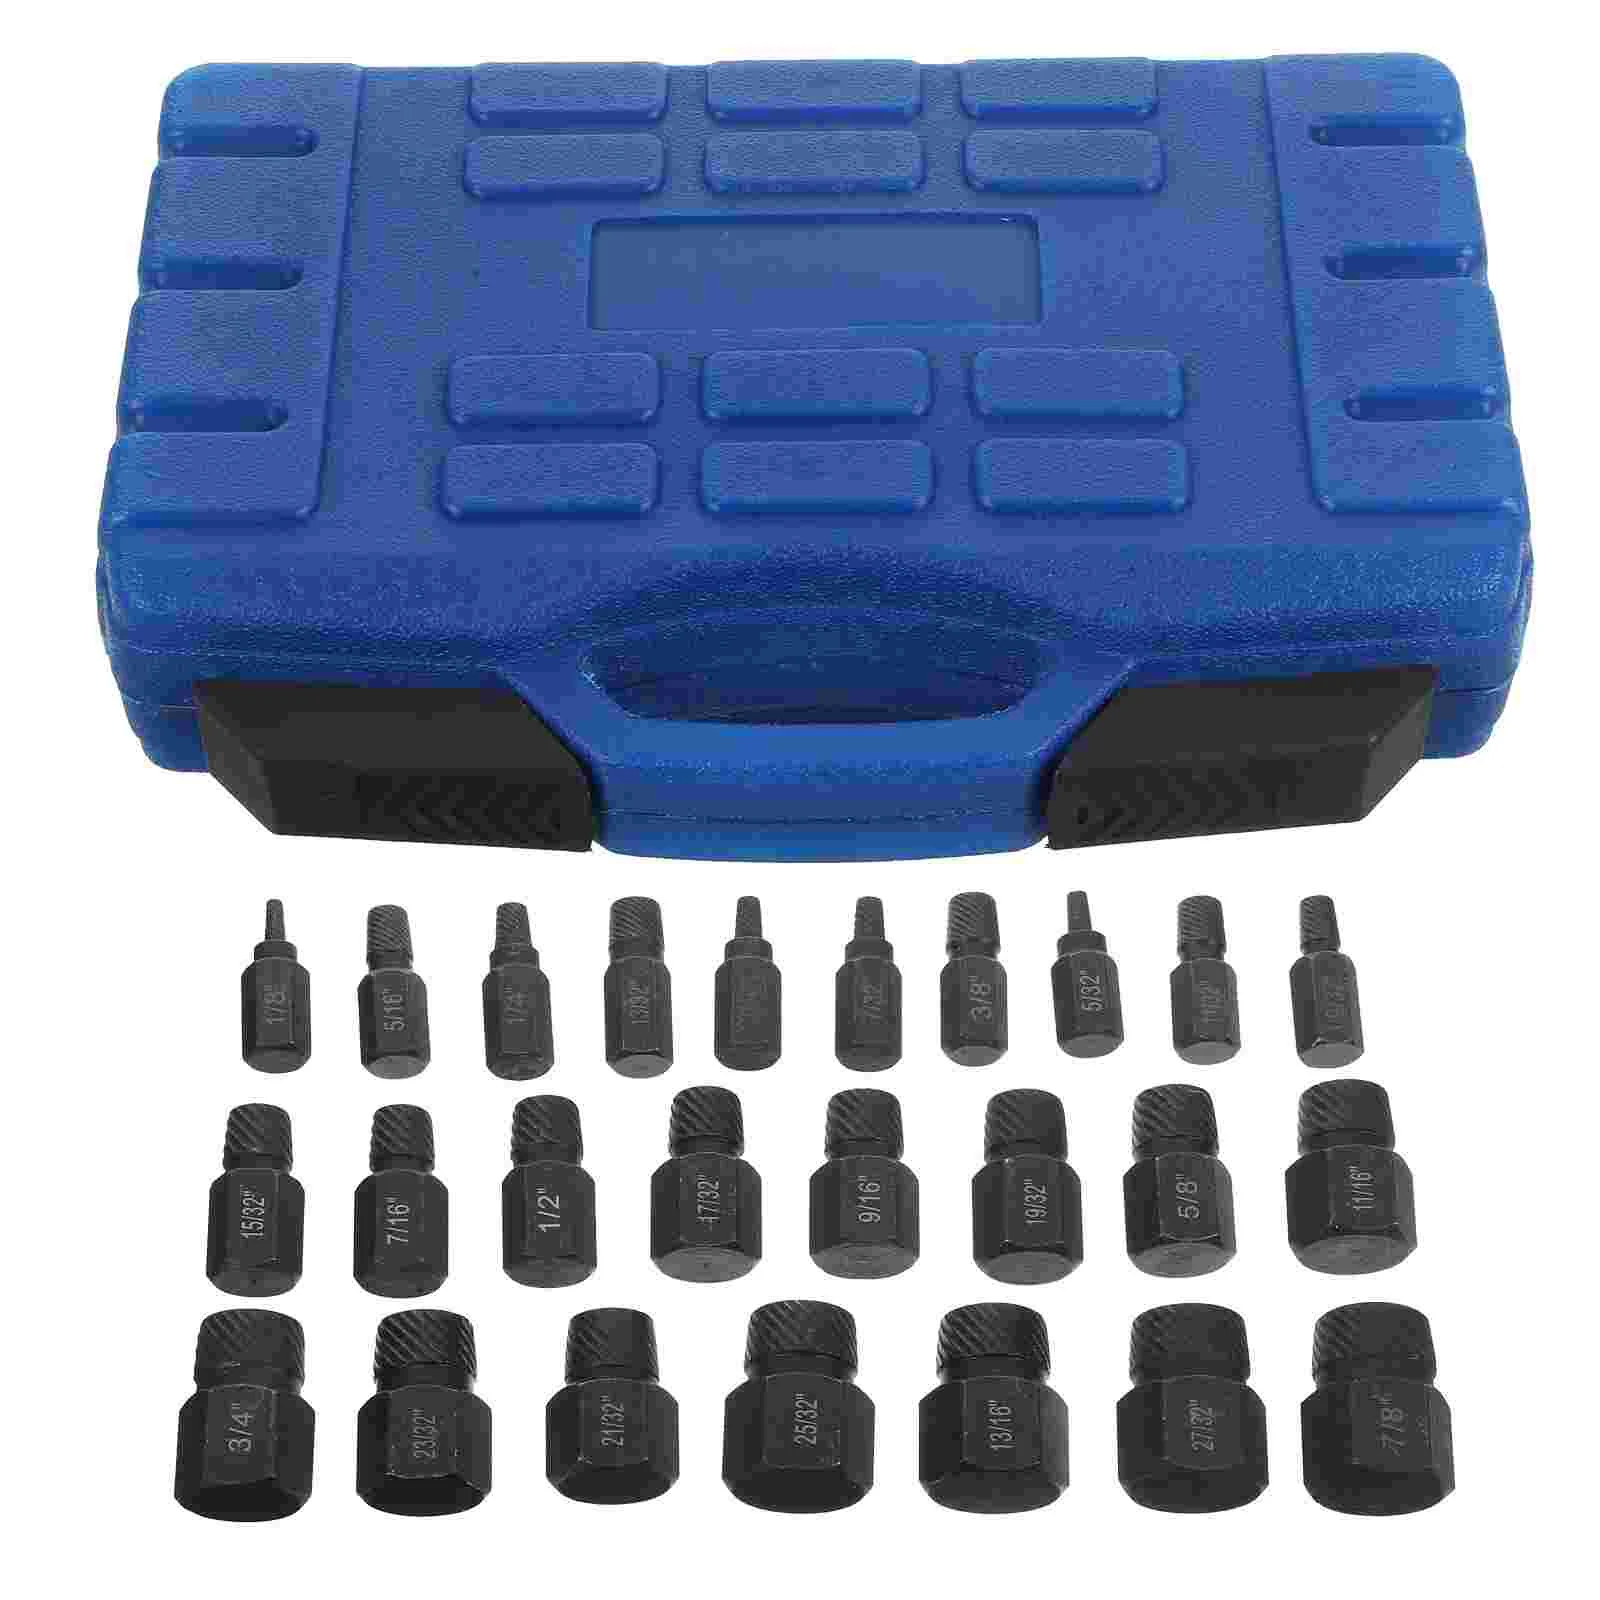 

Screw Extractor Small 25 Piece Set Stripped Screws Removal Tool Broken Bolt Kit Easy Out